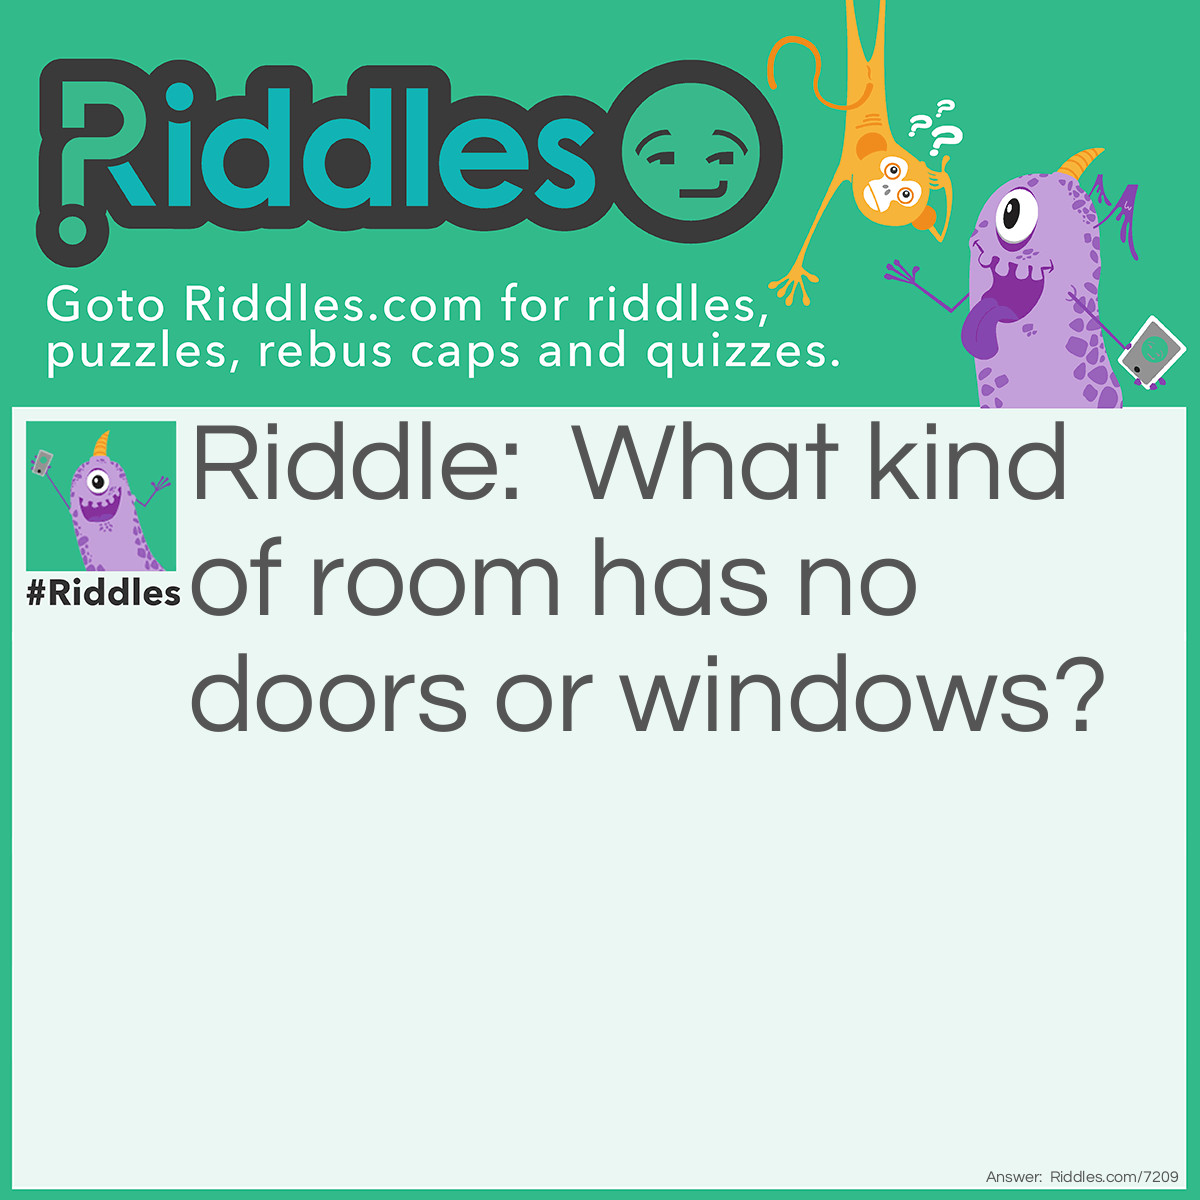 Riddle: What kind of room has no doors or windows? Answer: Mushroom.